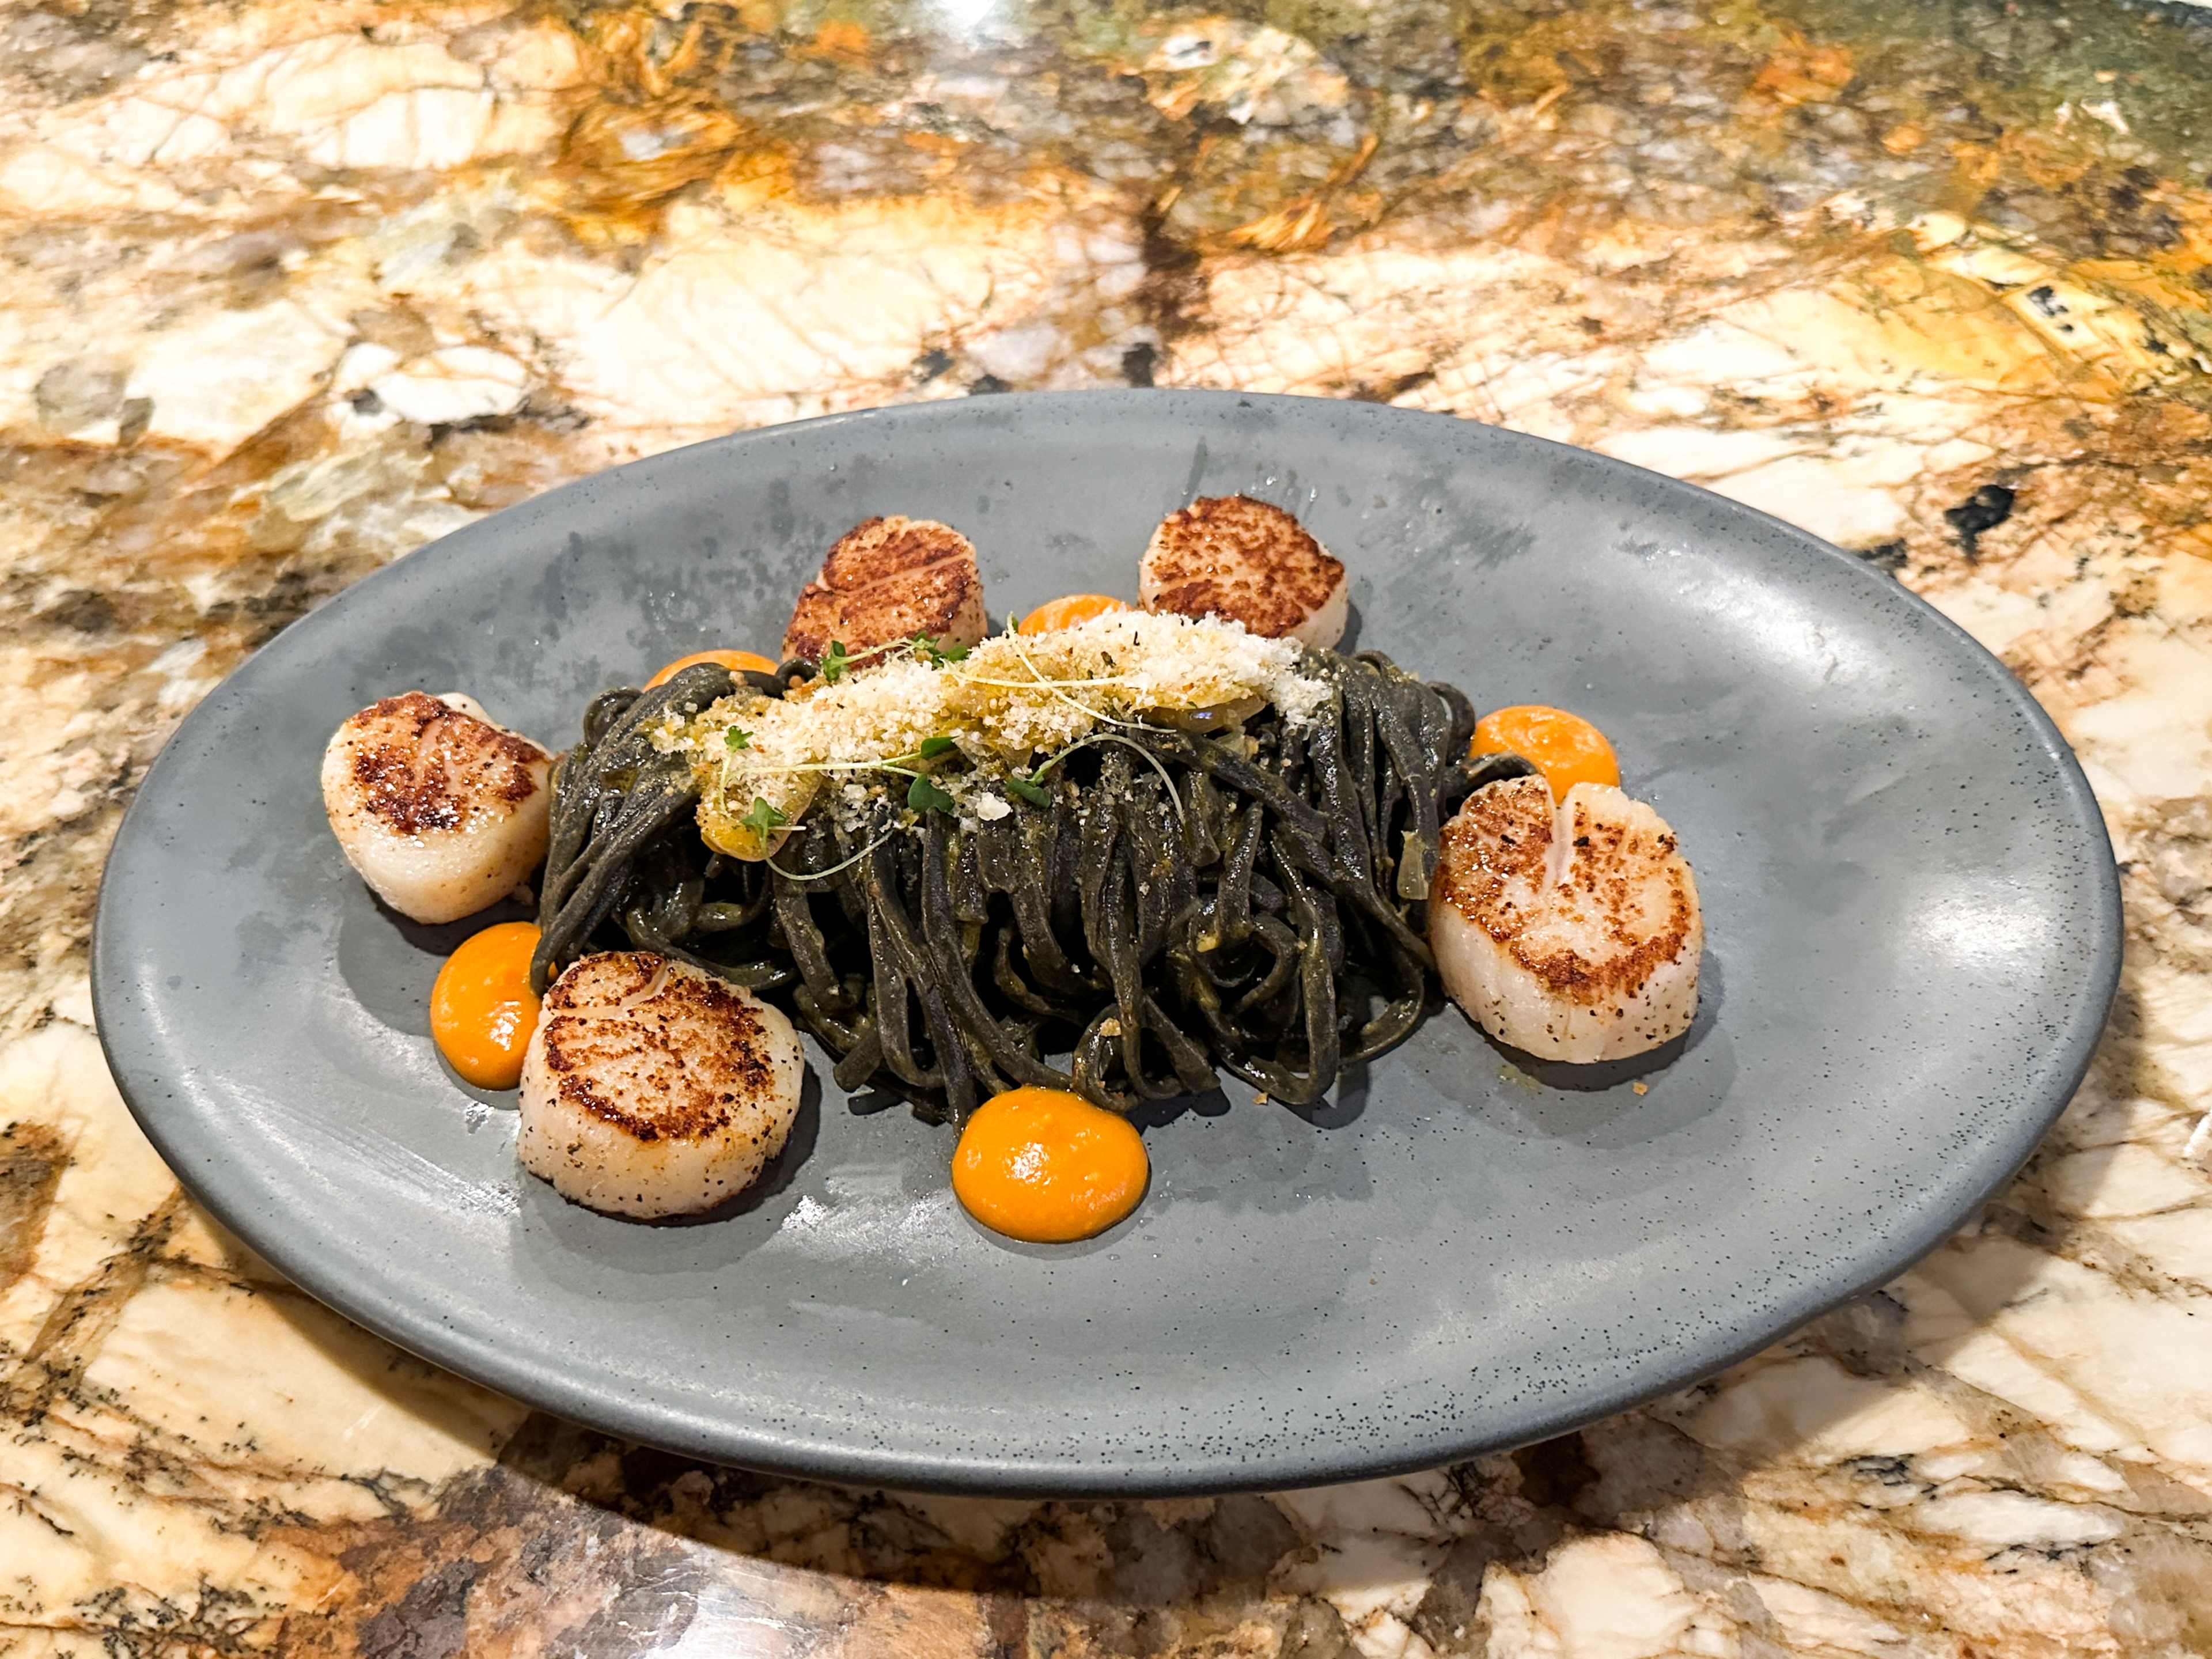 The sea scallops with squid ink linguini from Plank.